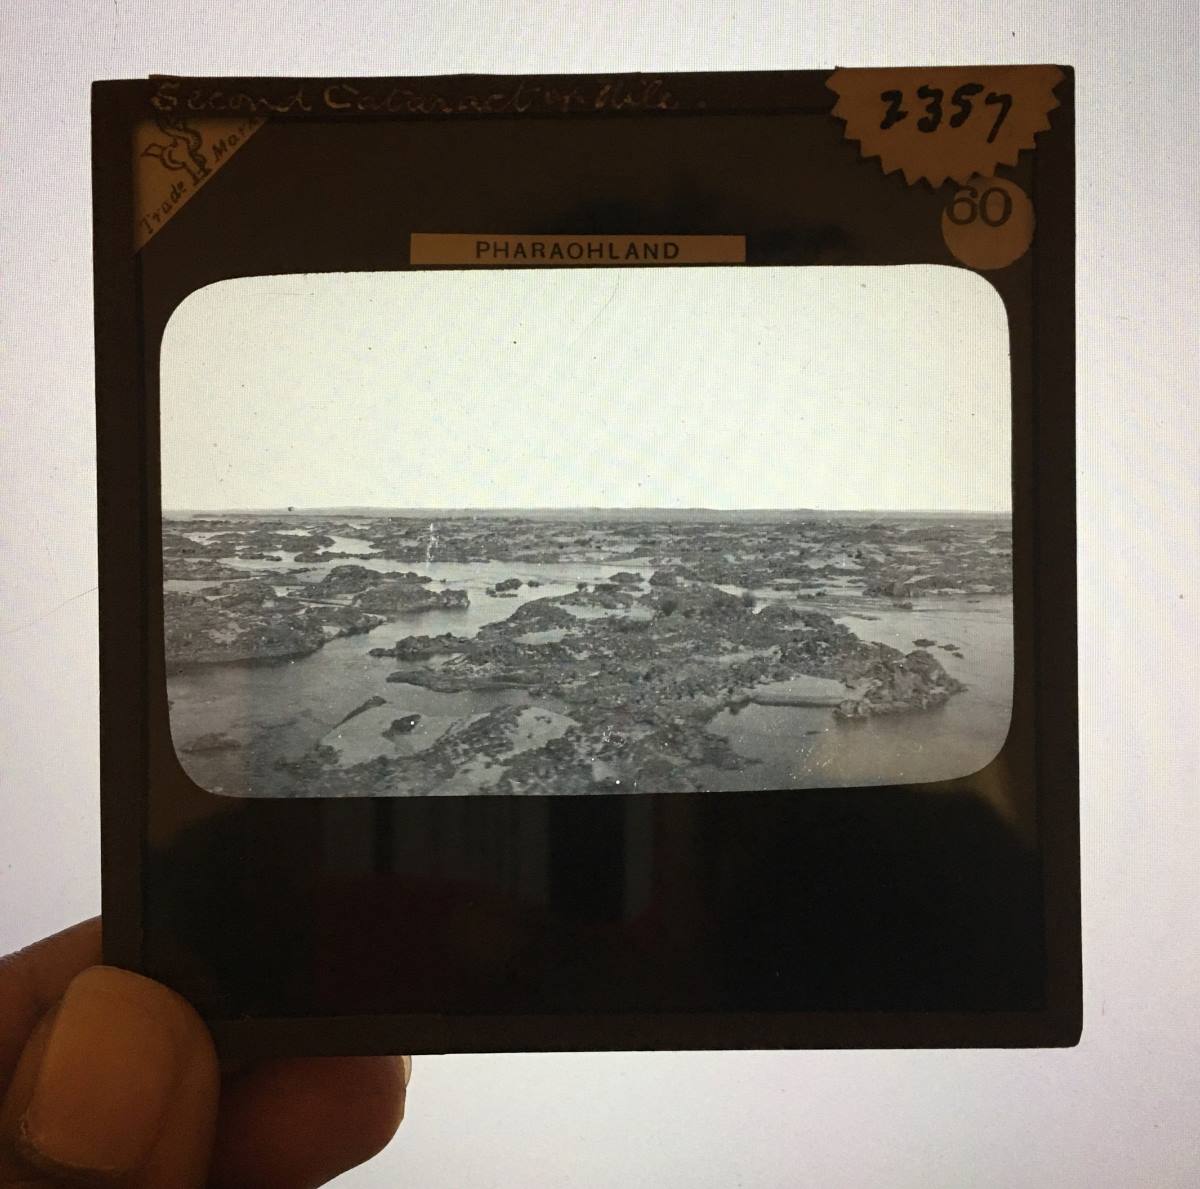 A hand holds a glass slide showing a landscape: the second cataract of the Nile.